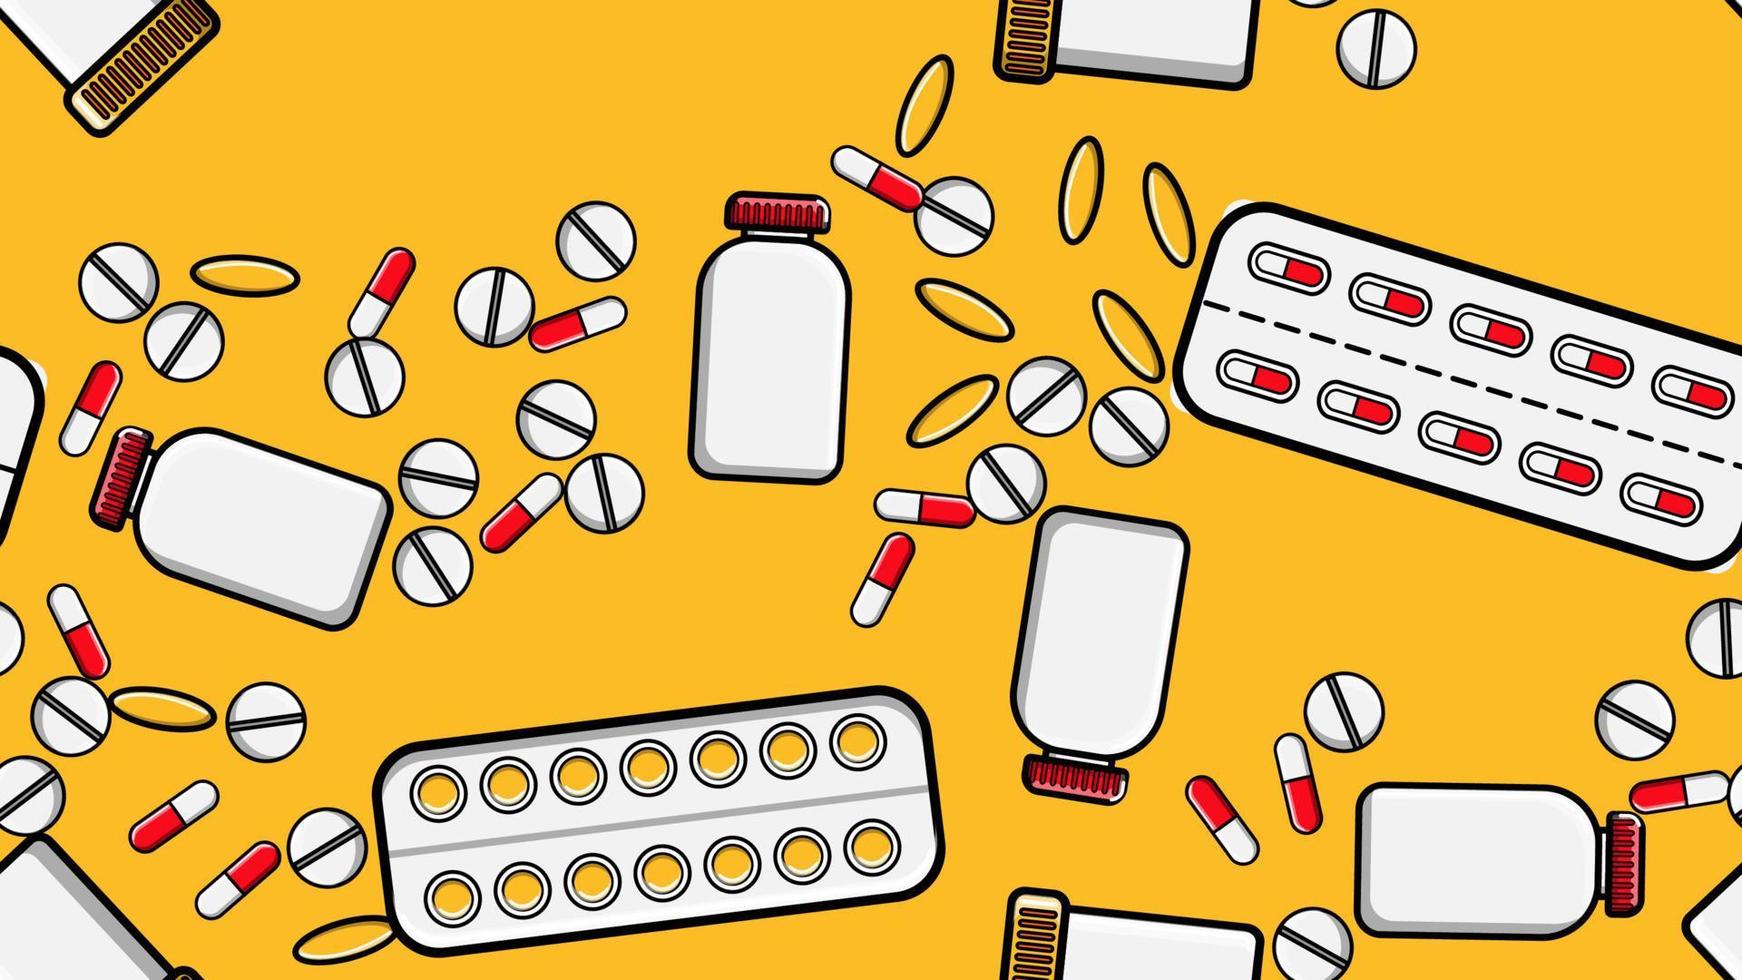 Seamless pattern texture of endless repetitive medicine tablets pills dragee capsules records cans of packs with medicines vitamins drugs on a yellow background flat lay top view. Vector illustration